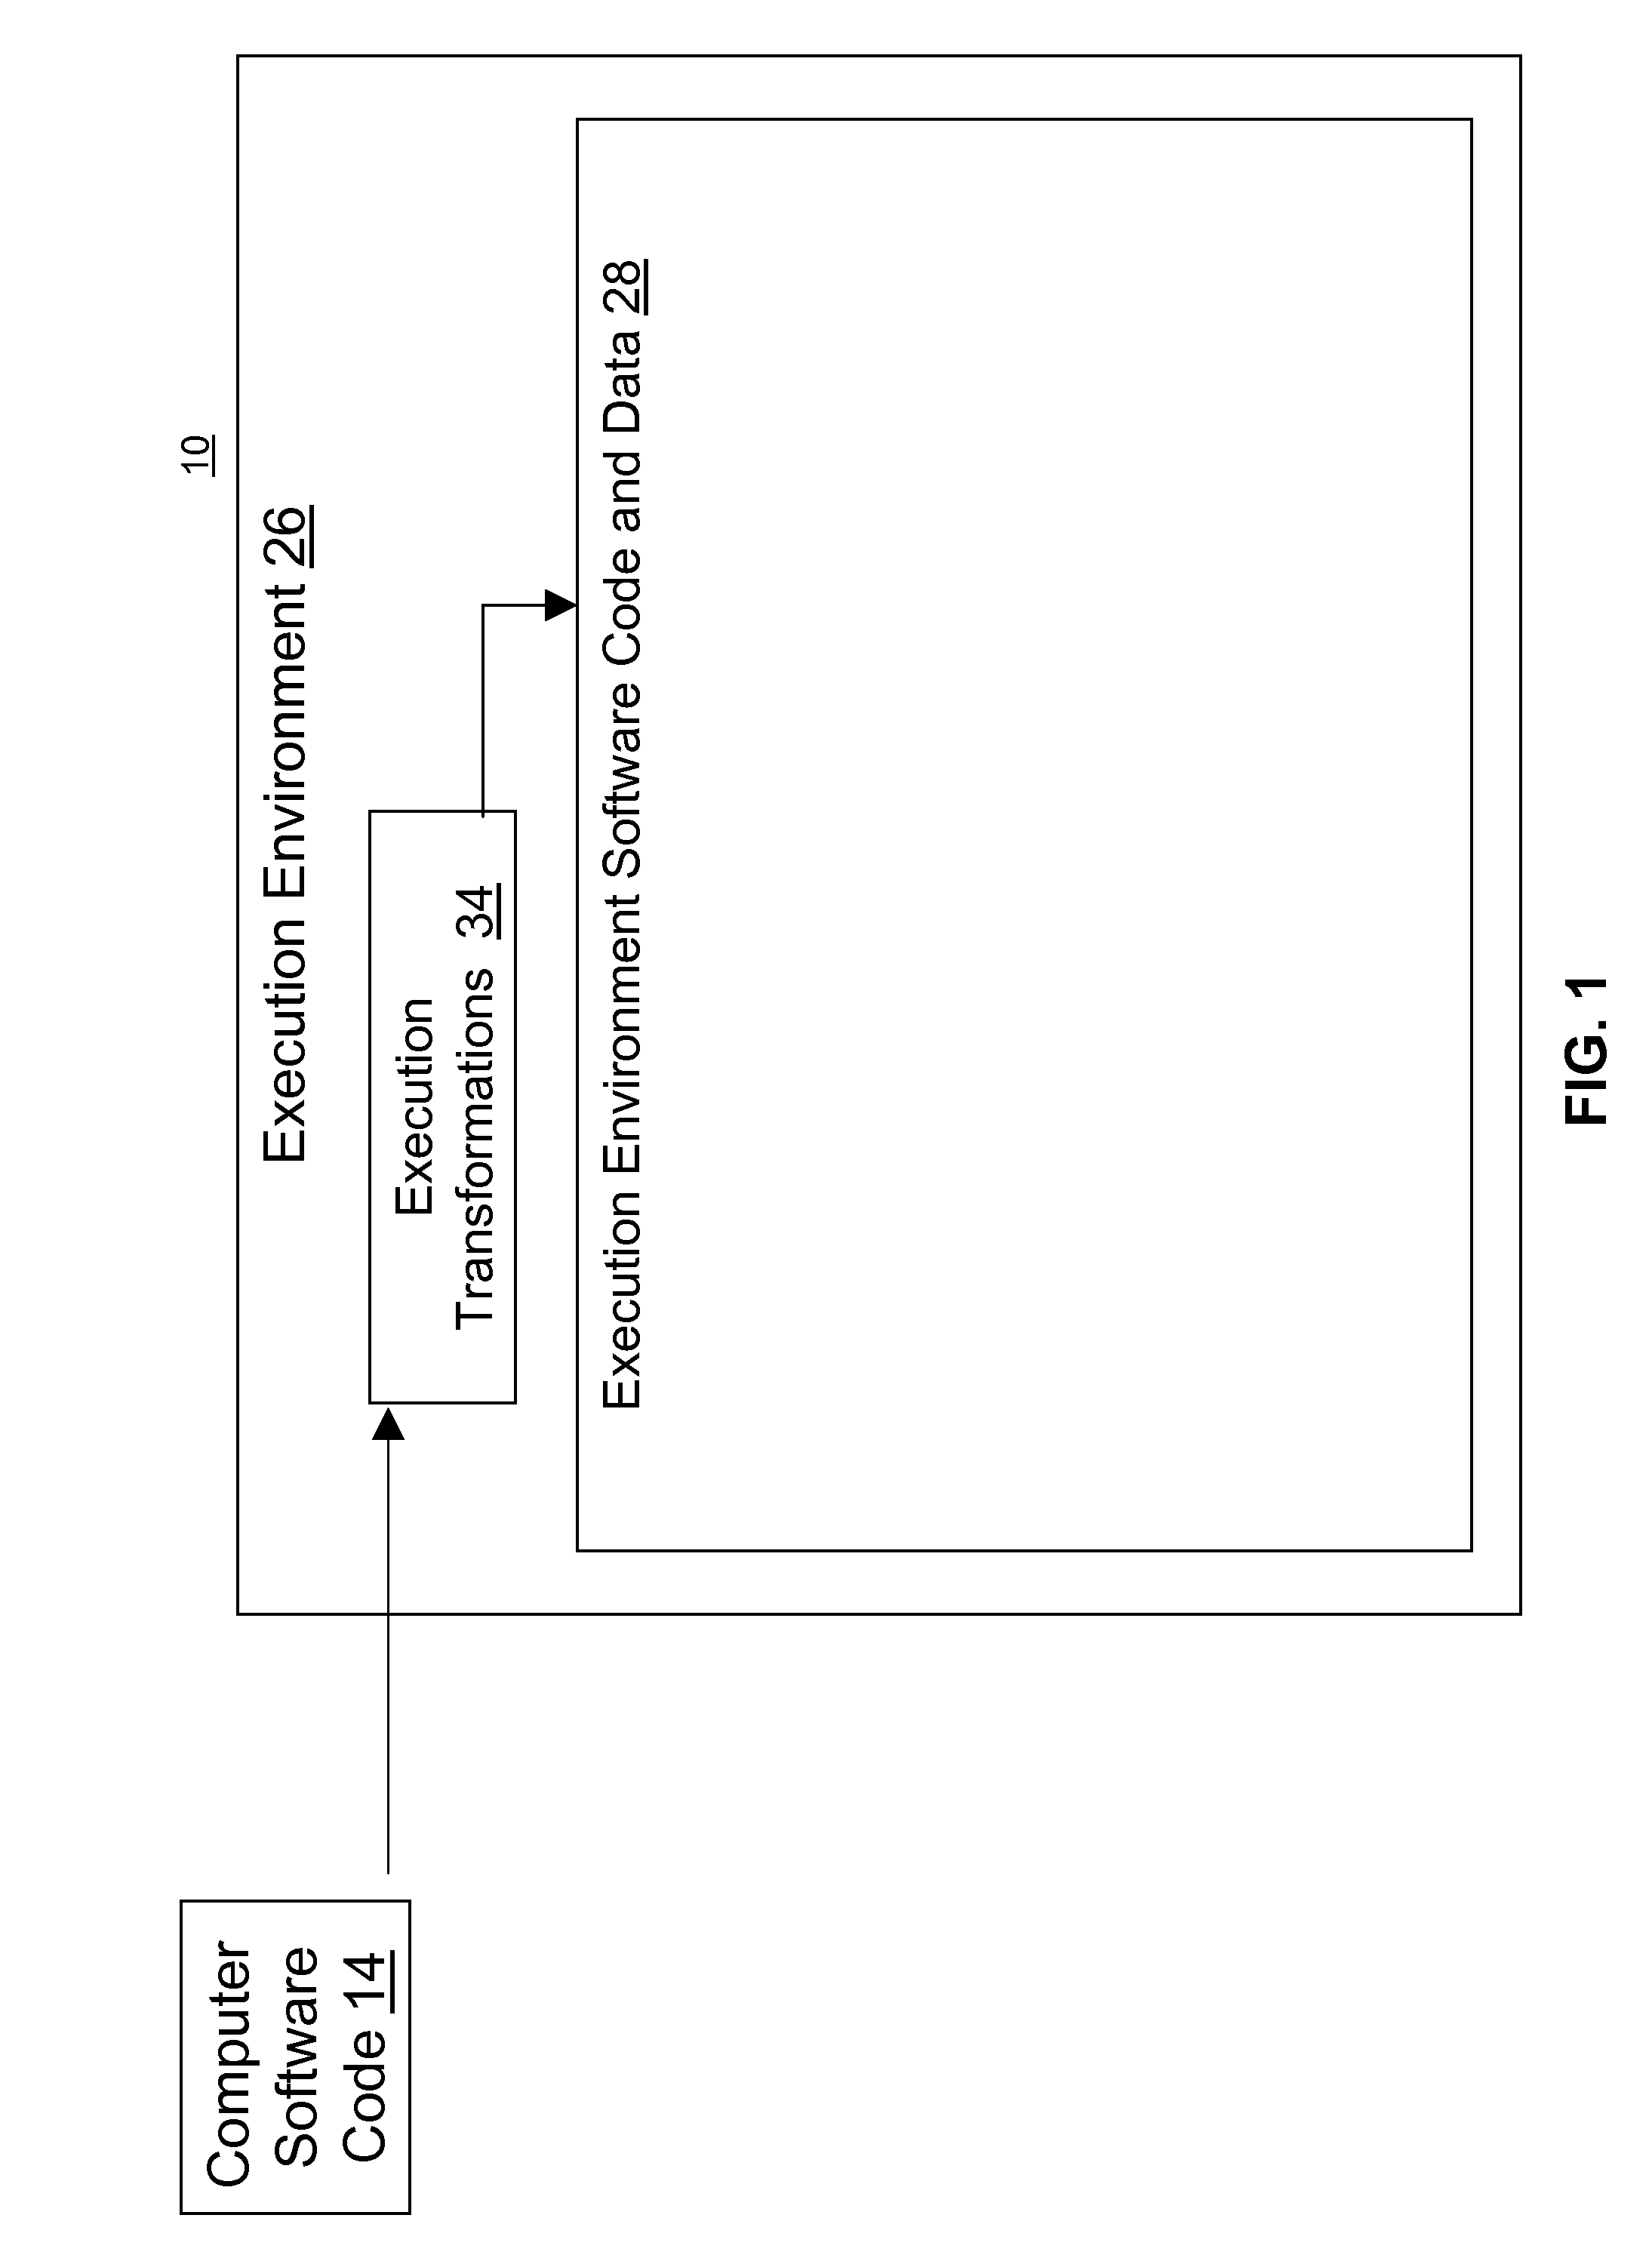 System, method and computer program product for protecting software via continuous anti-tampering and obfuscation transforms